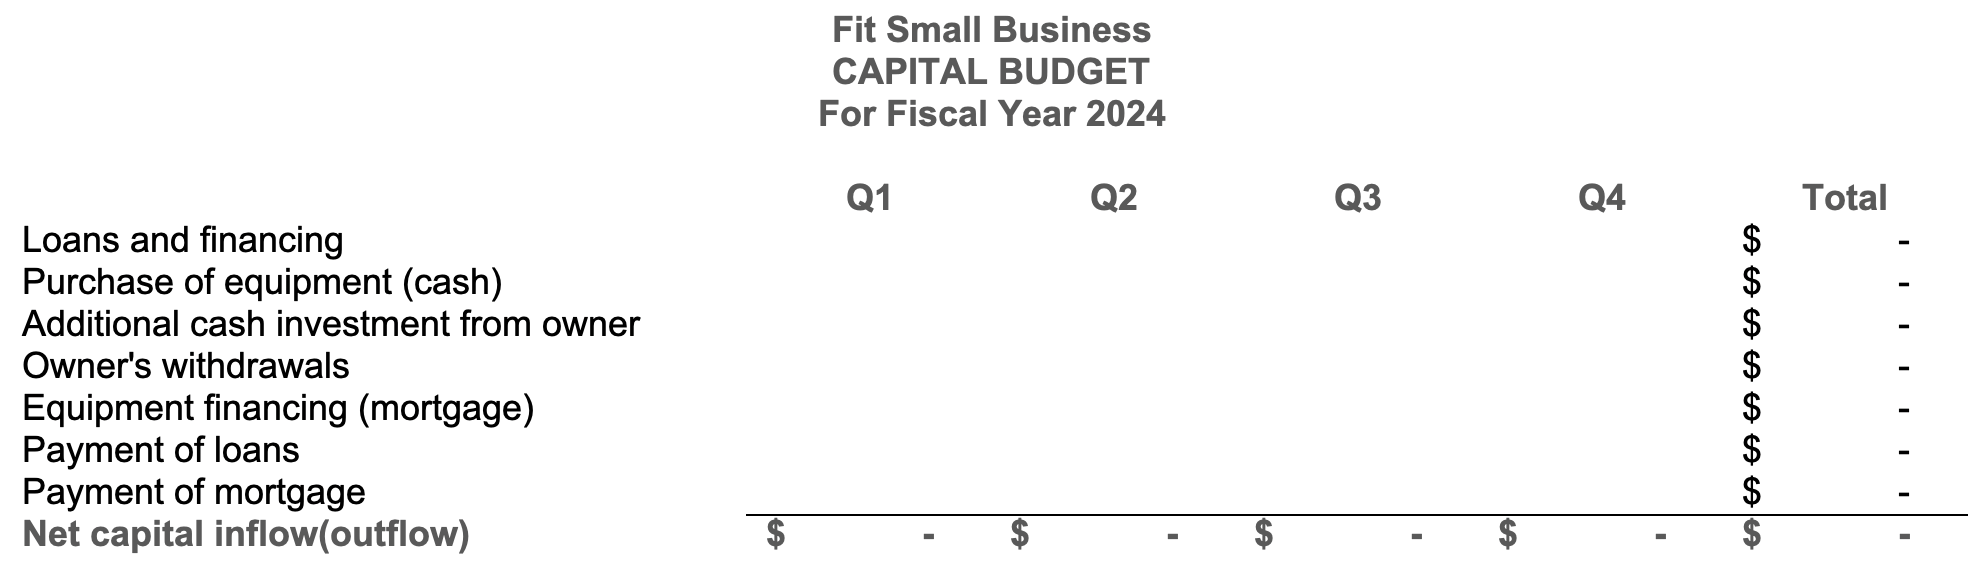 Image showing the capital budget